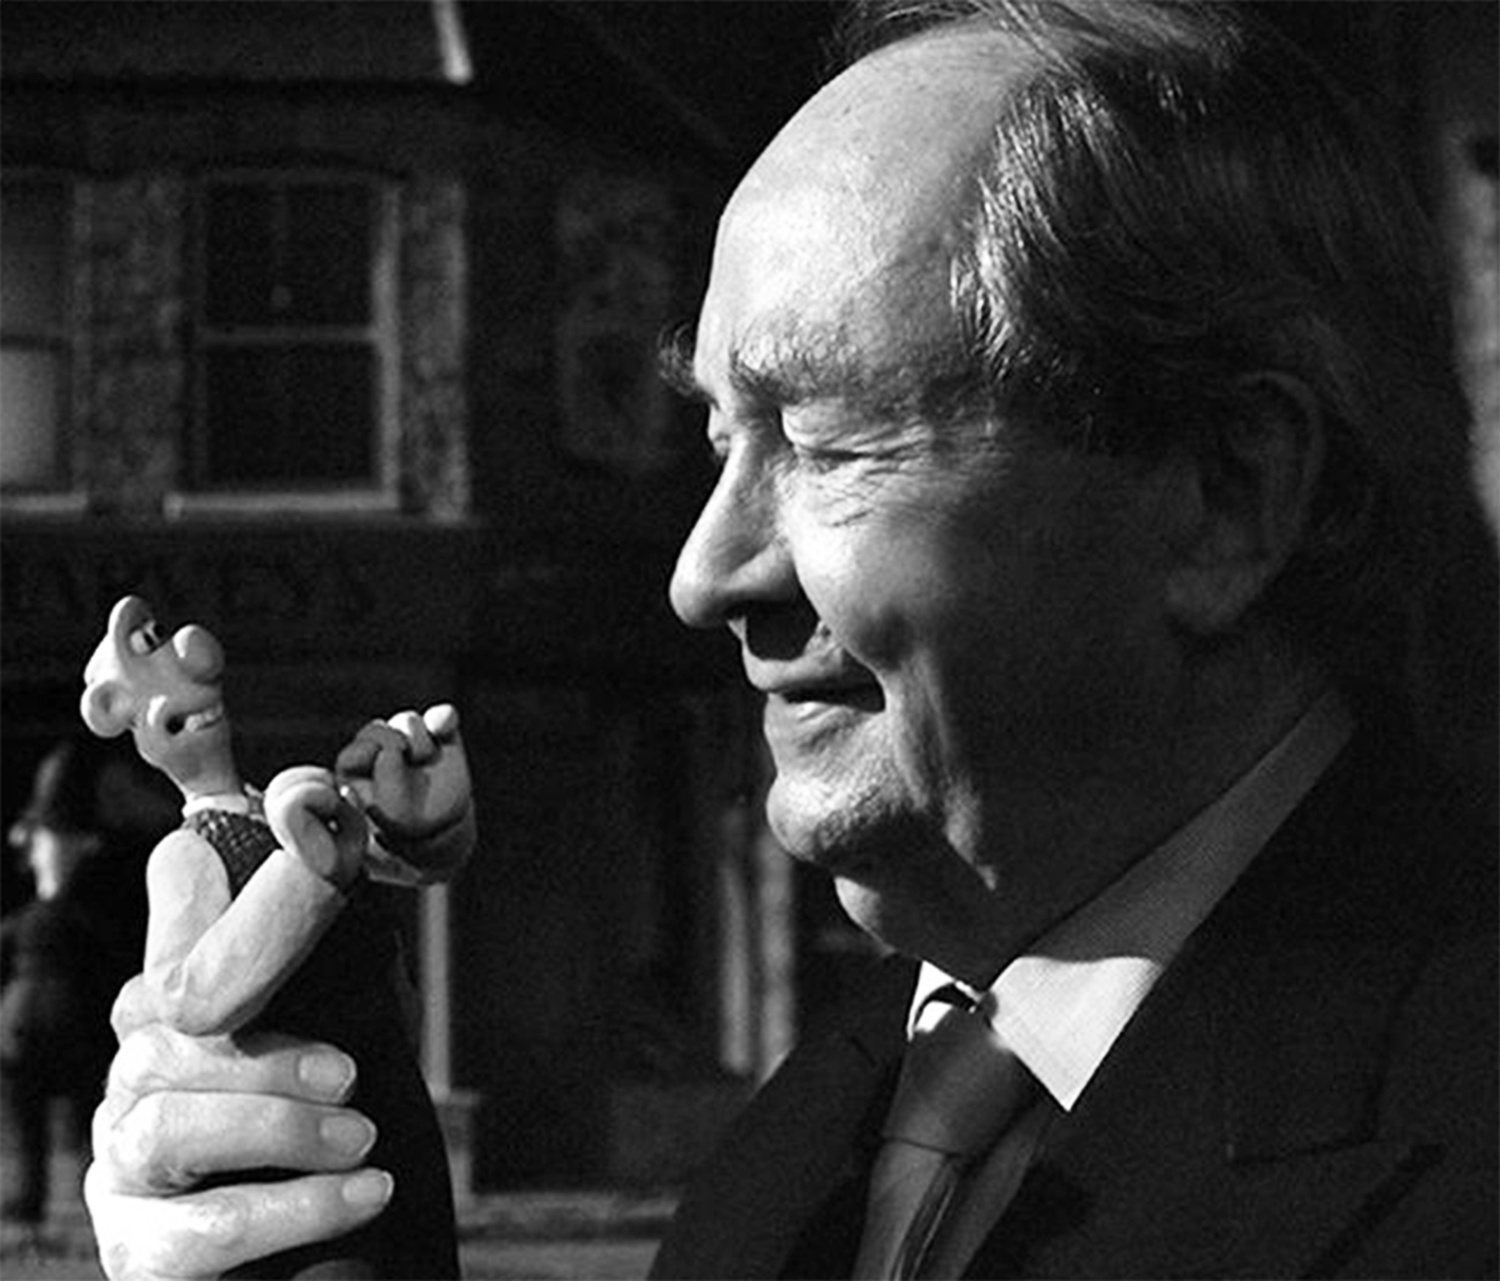 Peter Sallis is seen in this 2004 photo holding his counterpart Wallace while visiting Aardman Animations studio during the filming of the Academy Award Winning stop motion animated classic feature film Wallace & Gromit: The Curse of the Were-Rabbit (2005).